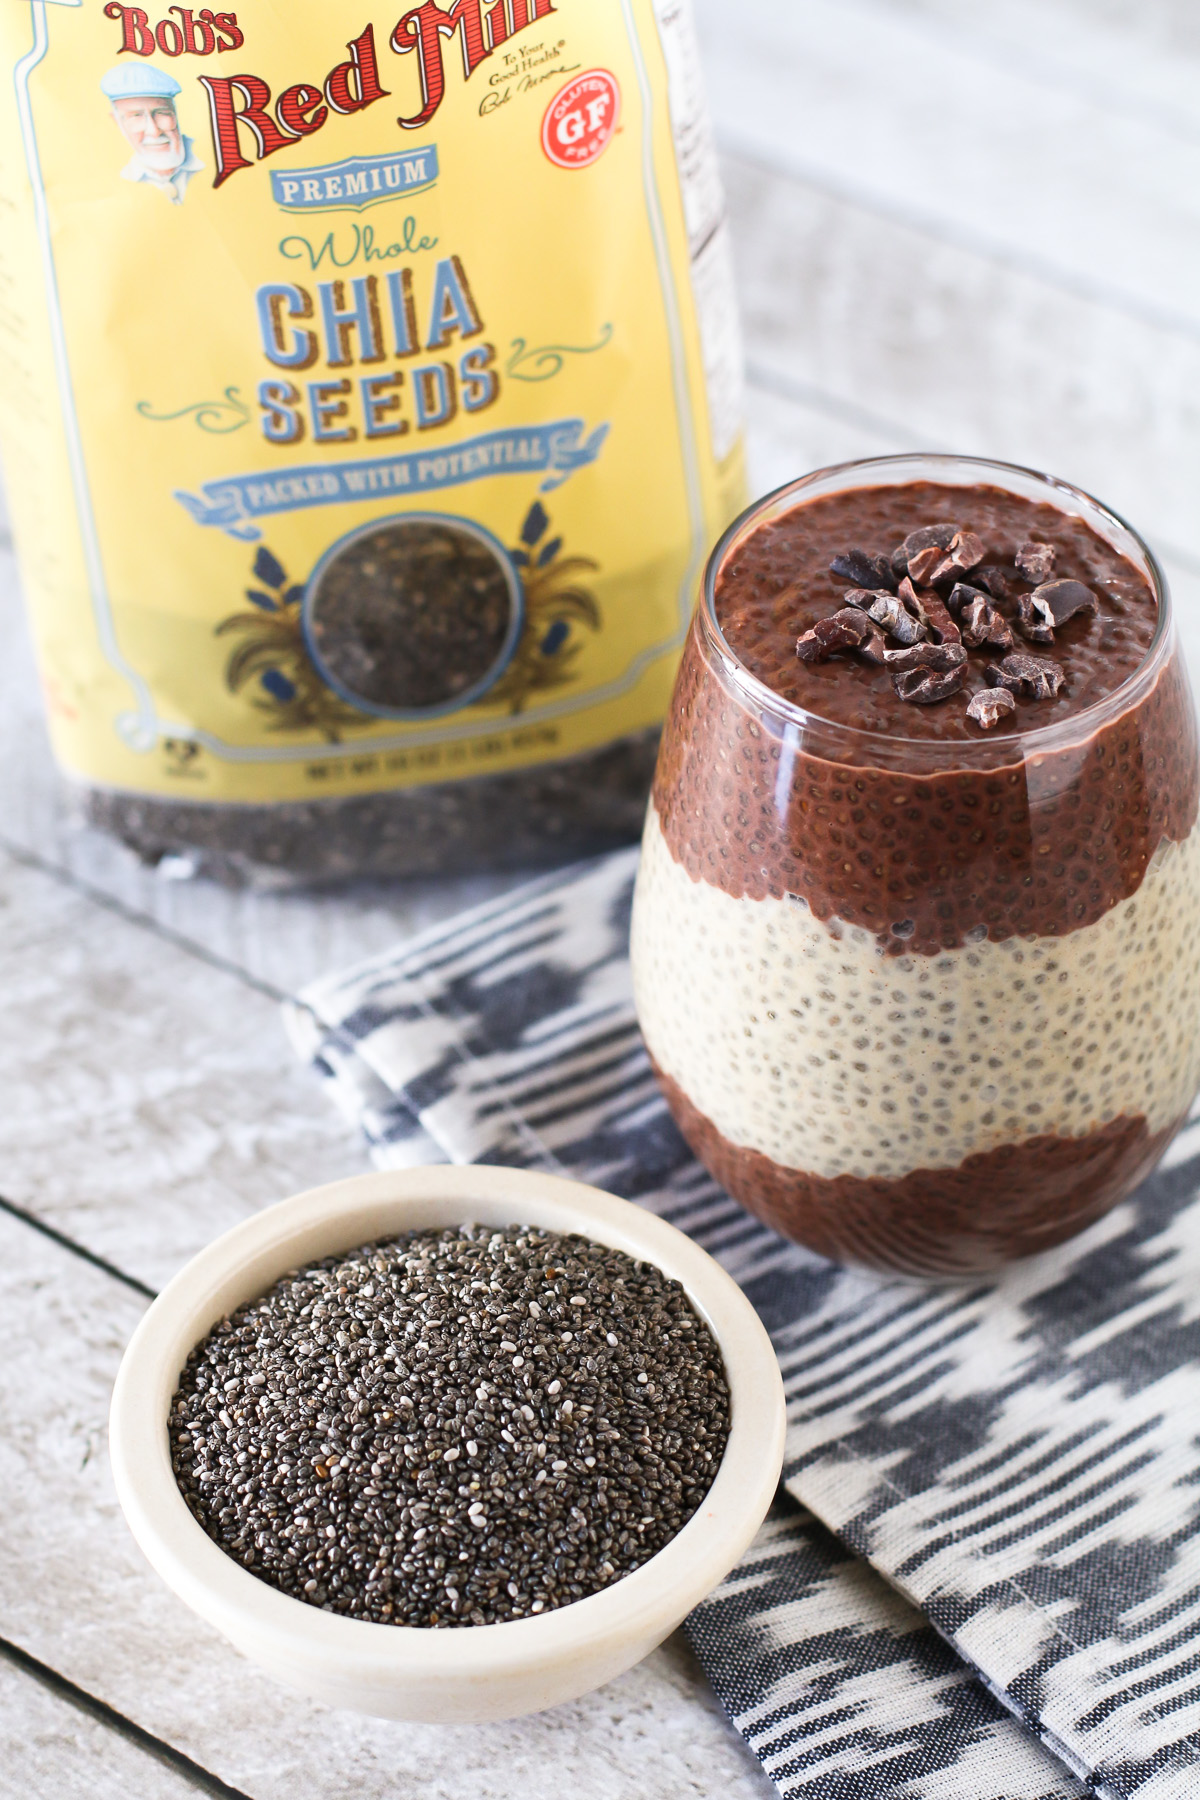 Dairy Free Chocolate Peanut Butter Chia Pudding. Made with Bob's Red Mill chia seeds, this is a healthy treat for those chocolate peanut butter lovers!